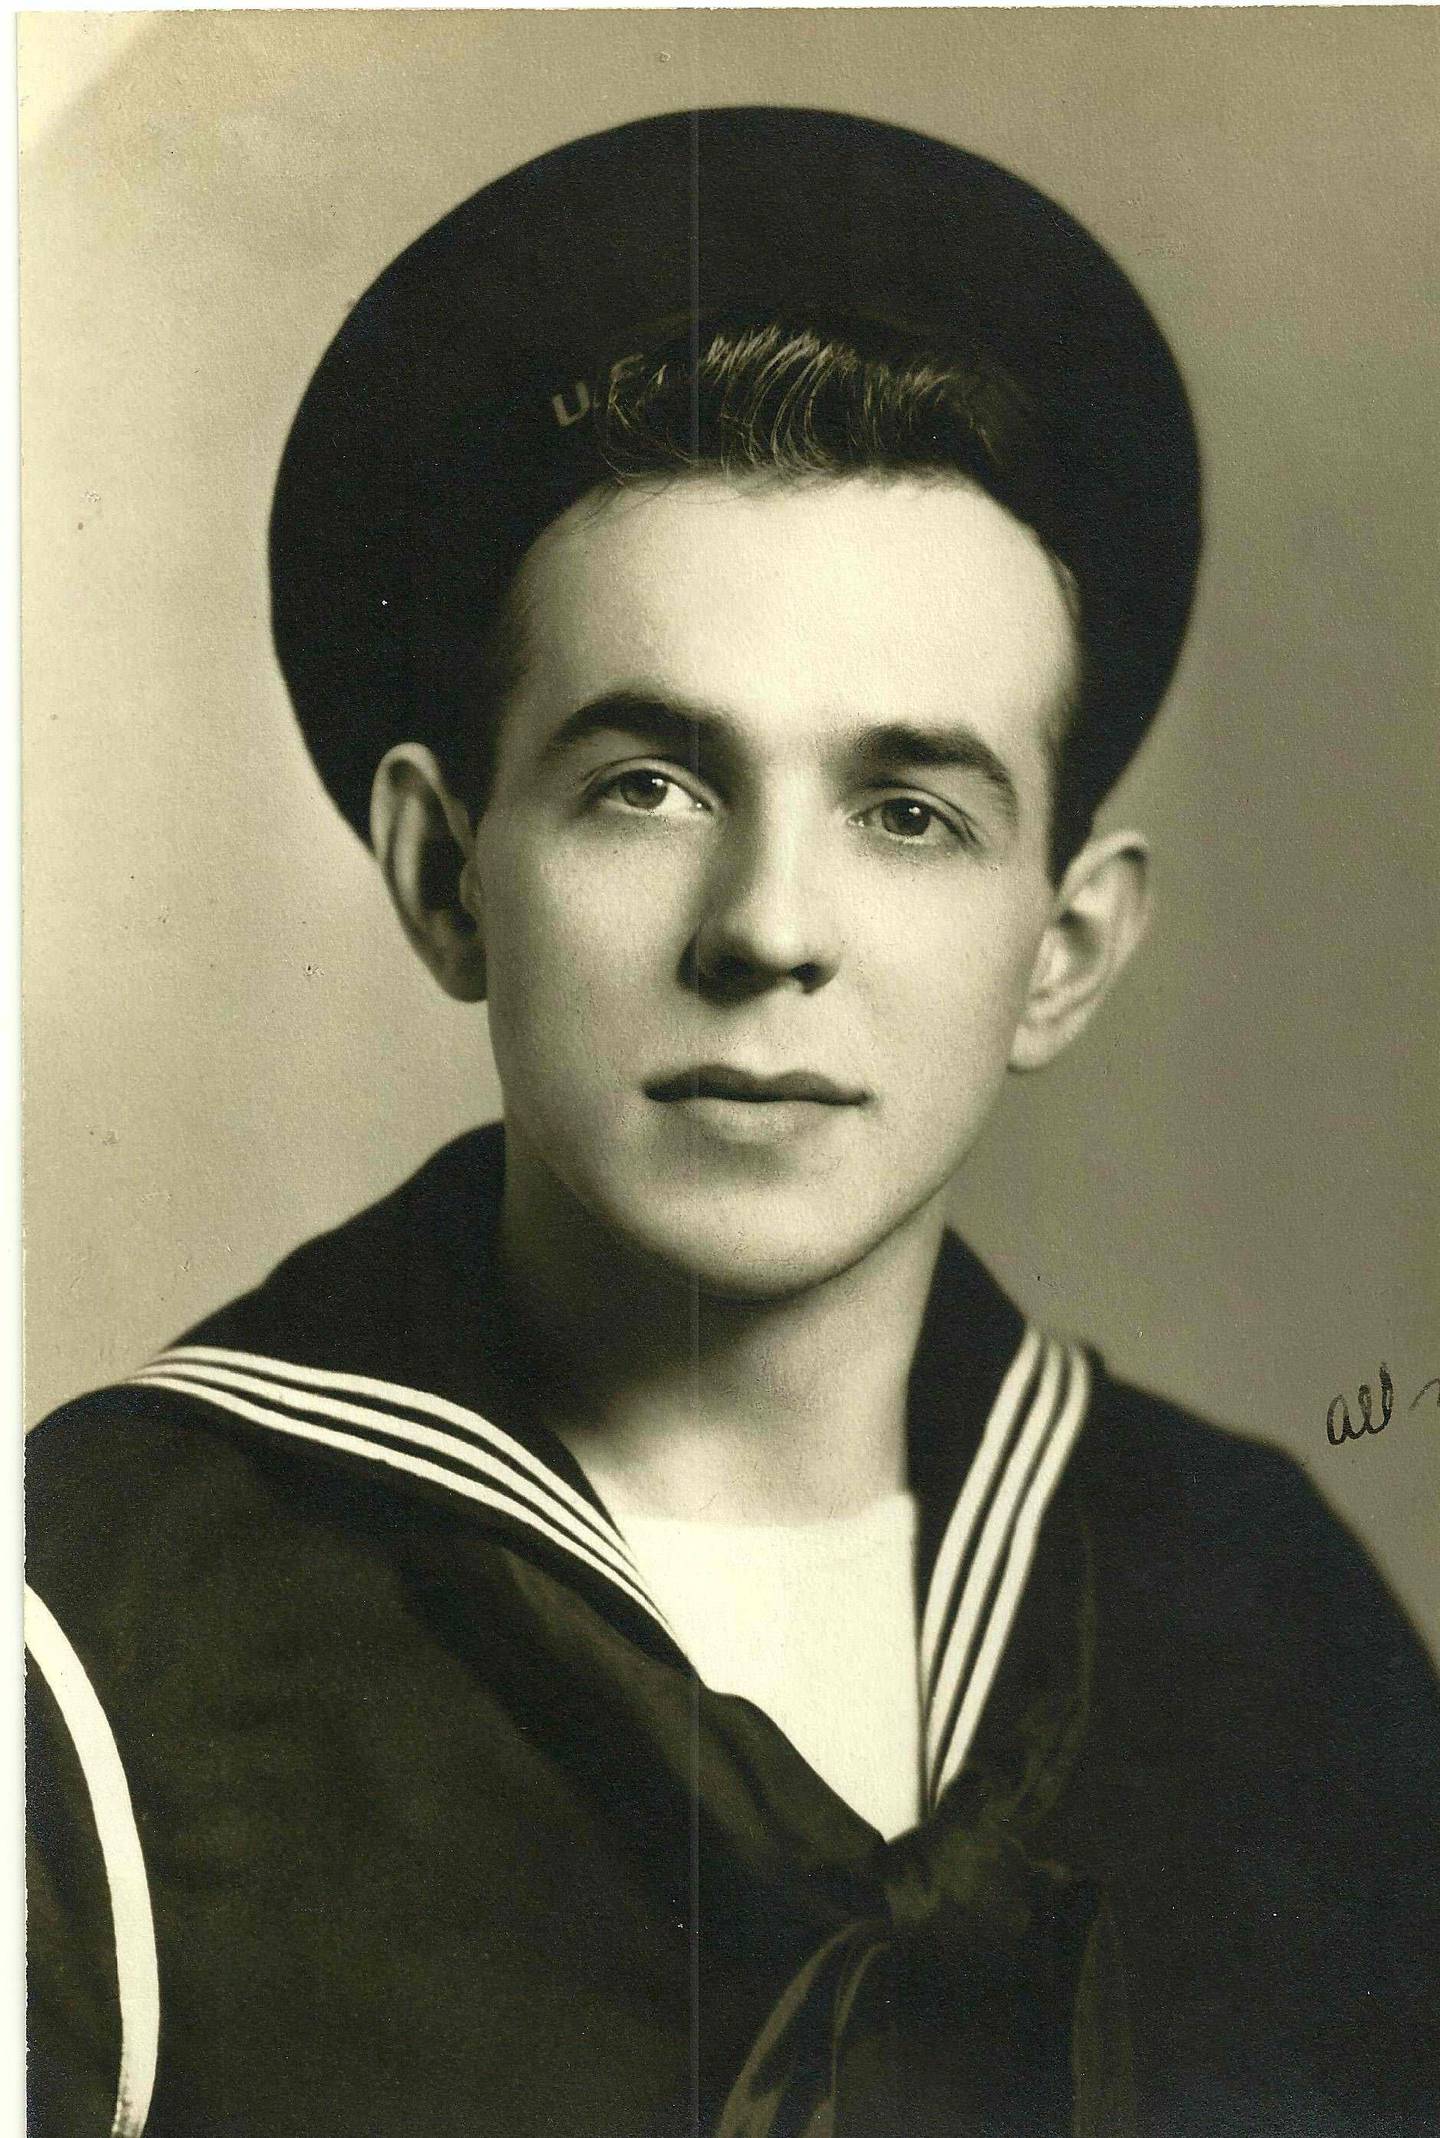 A photo of WWII Veteran Don Johnson during his time of service in the U.S Navy